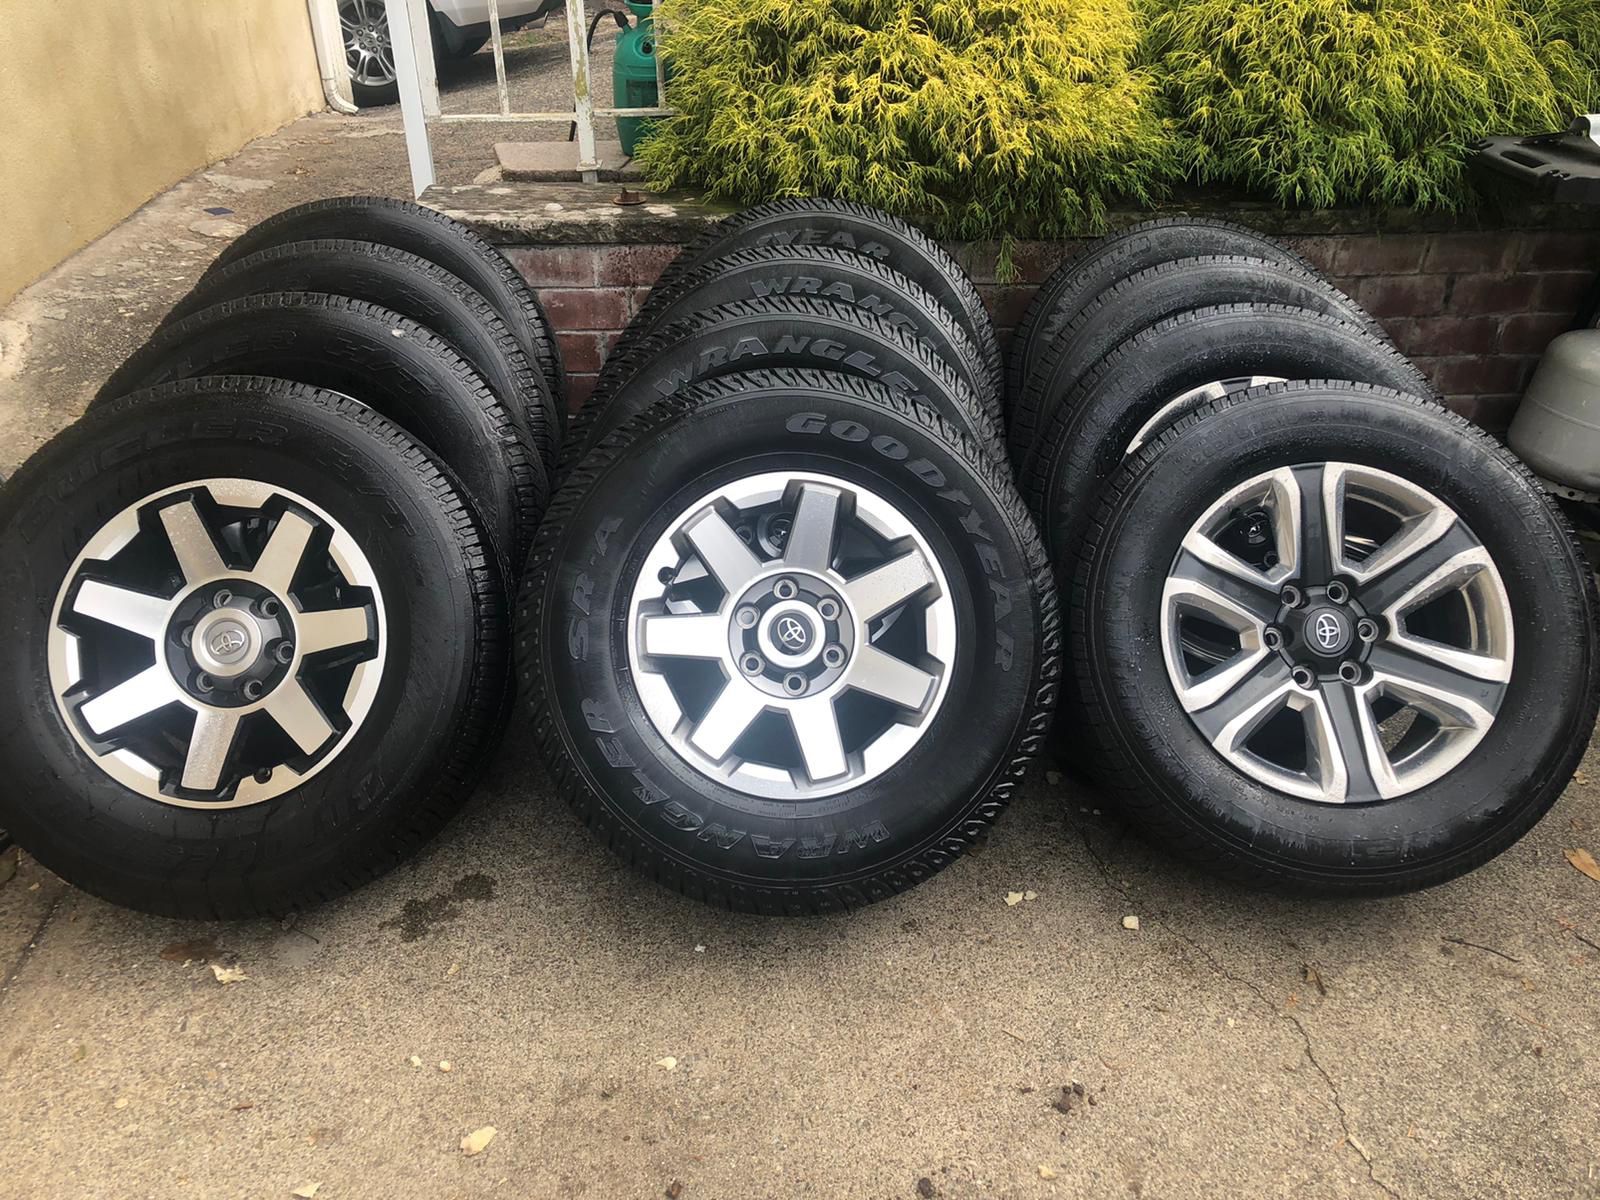 Toyota Tires and Rims